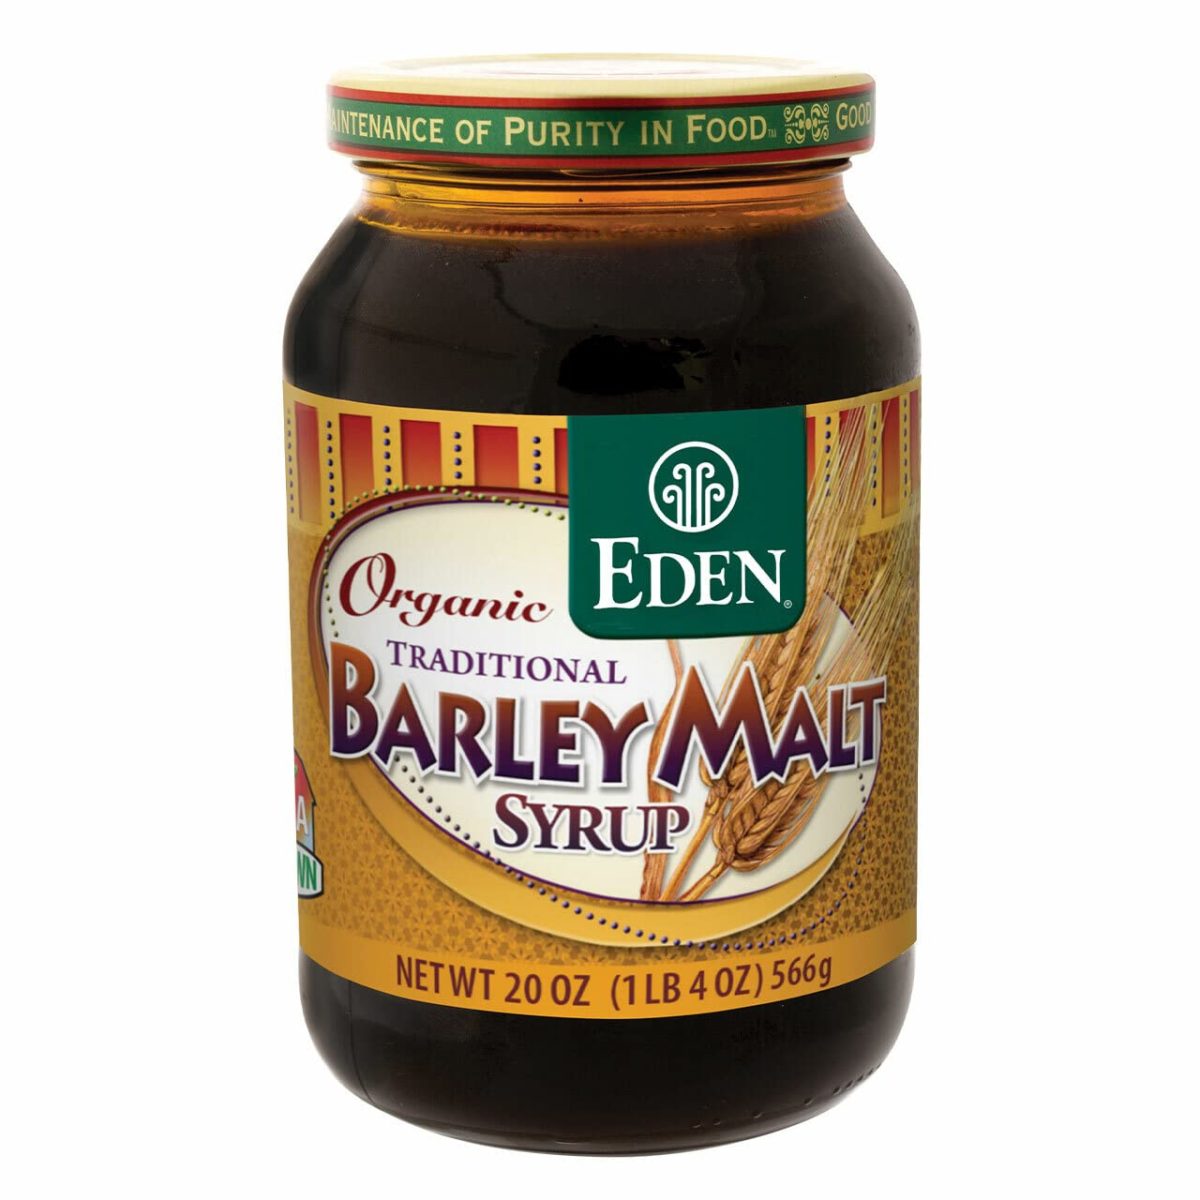 Barley malt syrup as a substitute for rice syrup